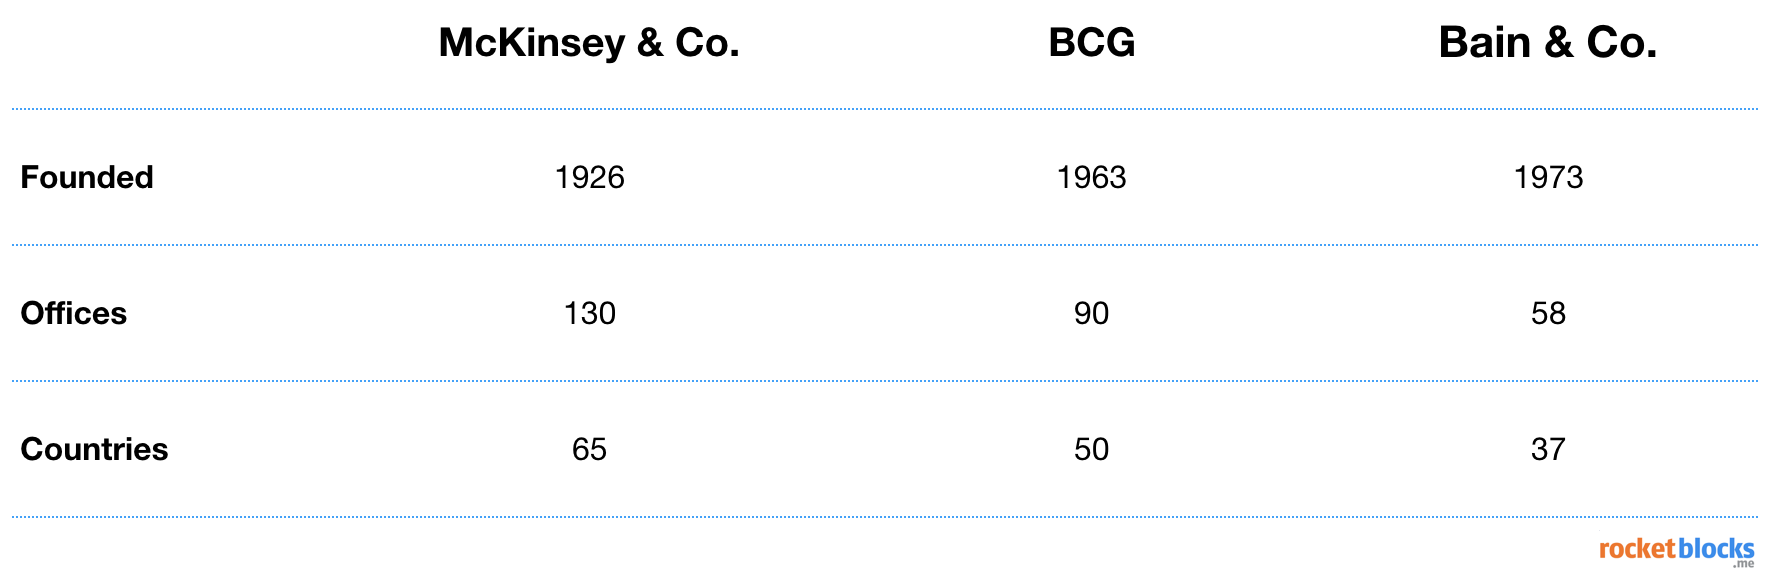 McKinsey, BCG and Bain were founded in 1926, 1963 and 1973, respectively. McKinsey, BCG and Bain operate in 65,50 and 37 countries, respectively.